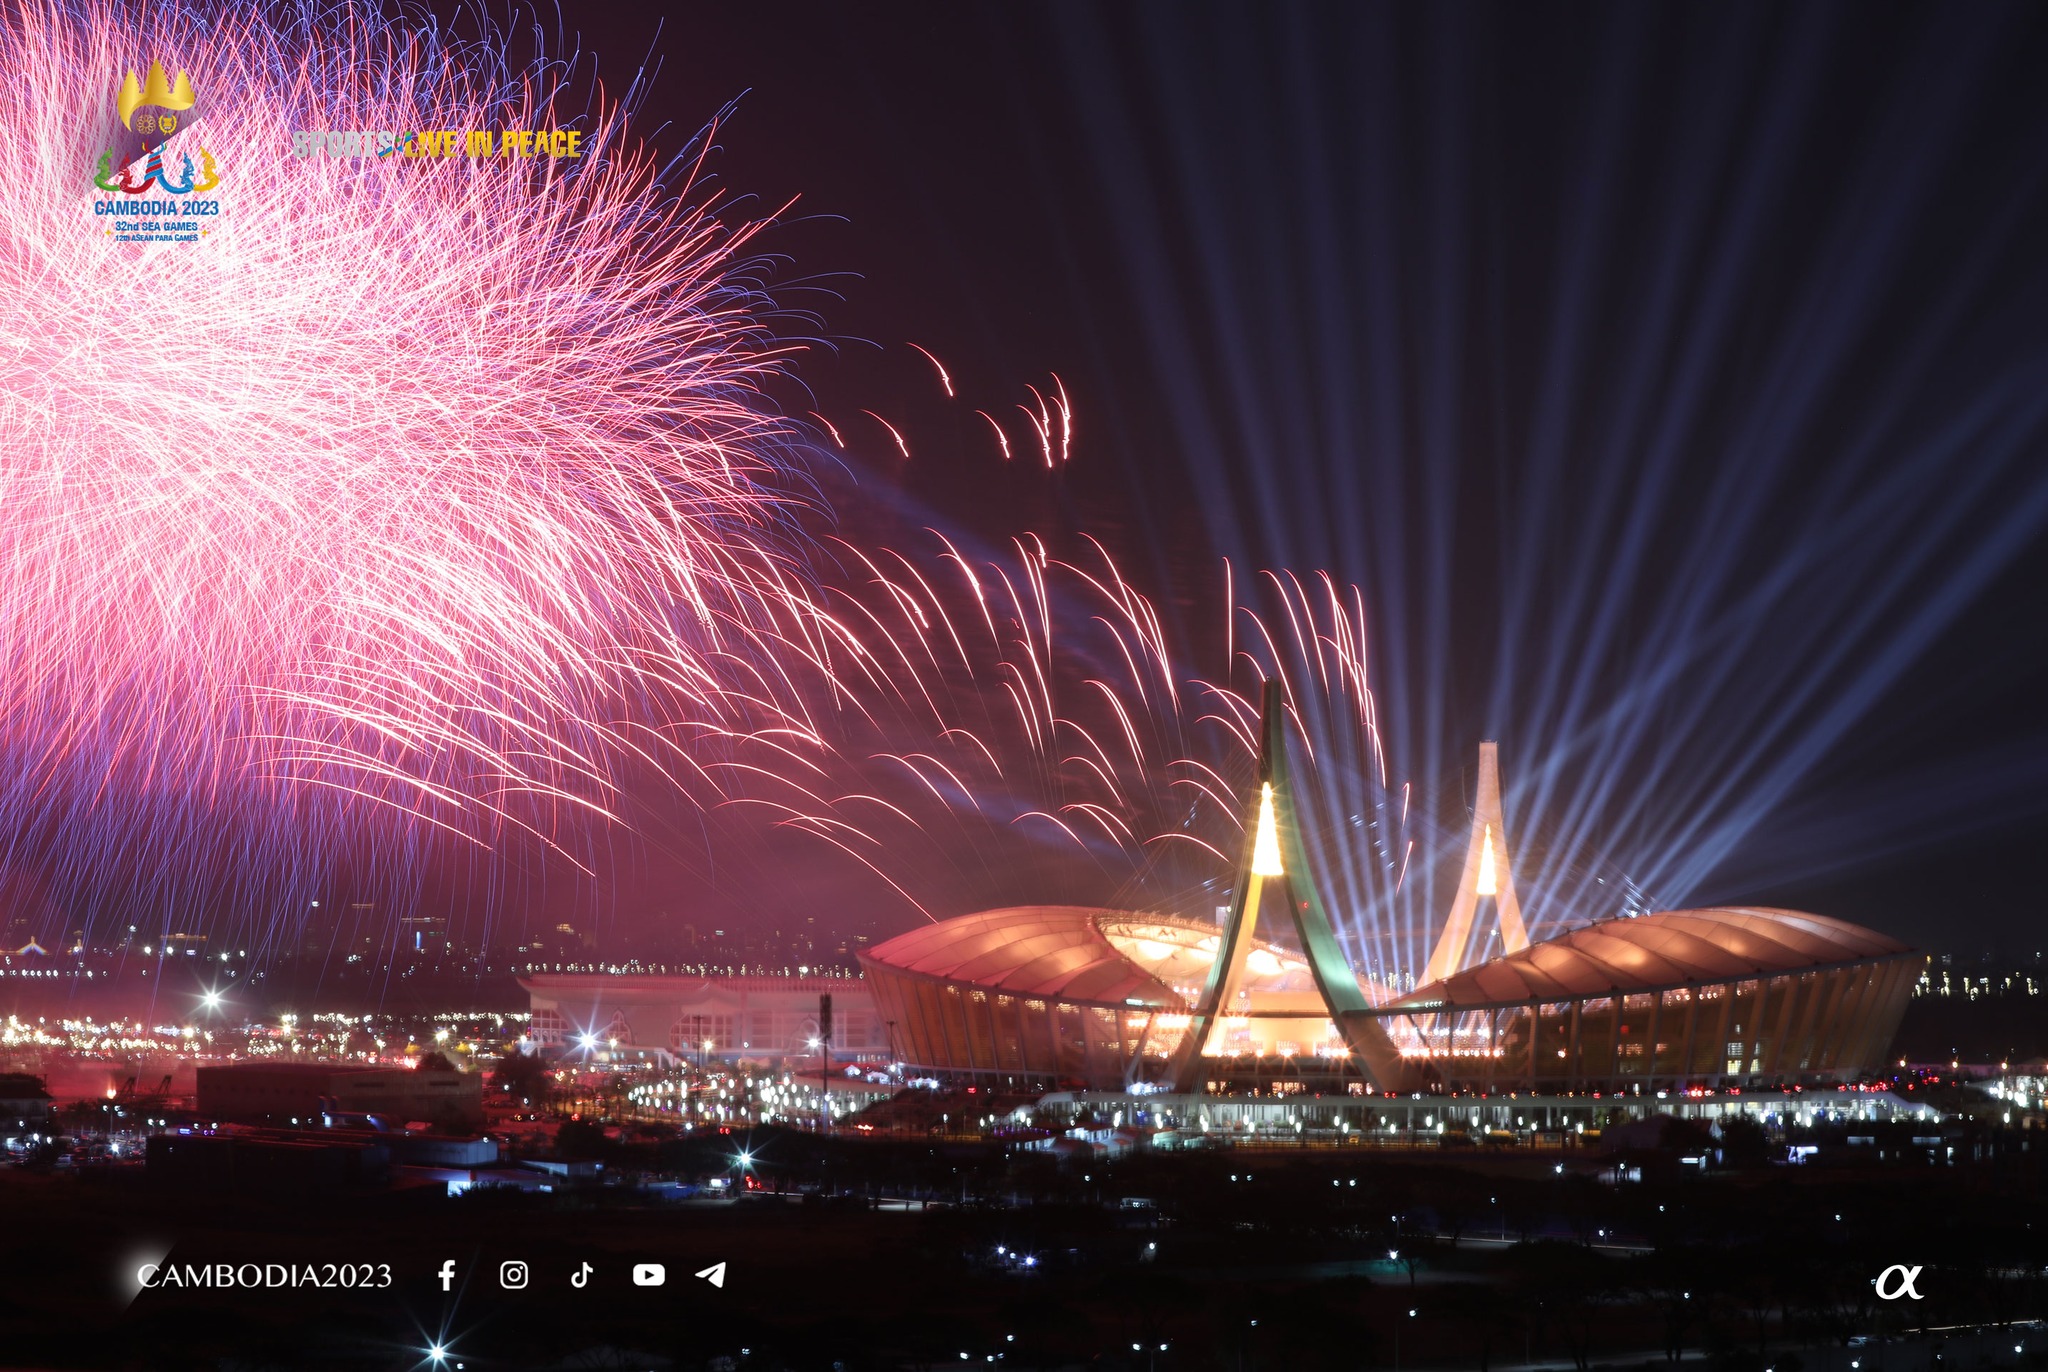 Cambodia Wows with 32nd SEA Games’ Opening Ceremony